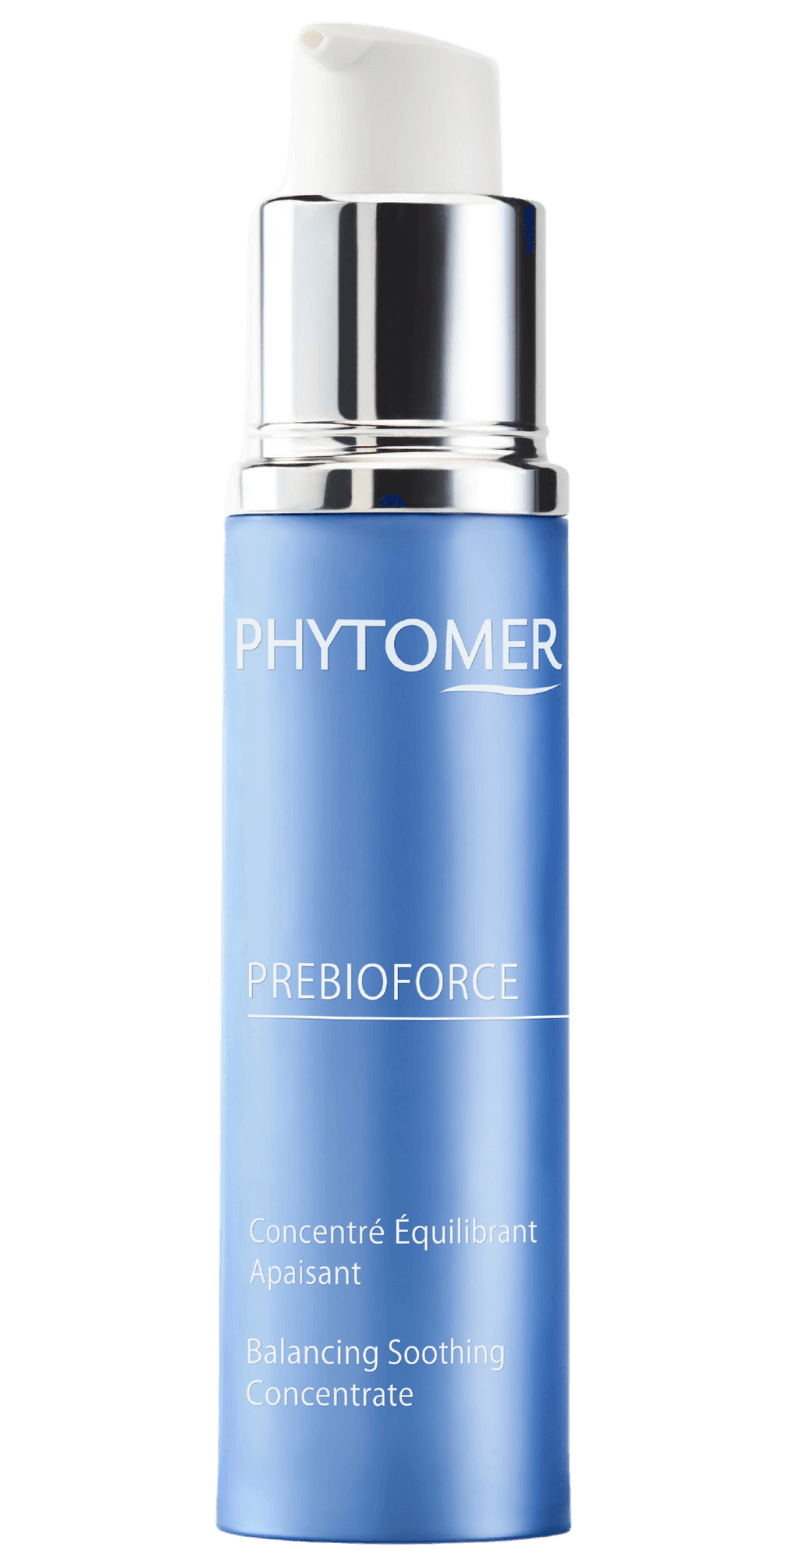 's Phytomer PREBIOFORCE Balancing Soothing Concentrate - Bellini's Skin and Parfumerie 